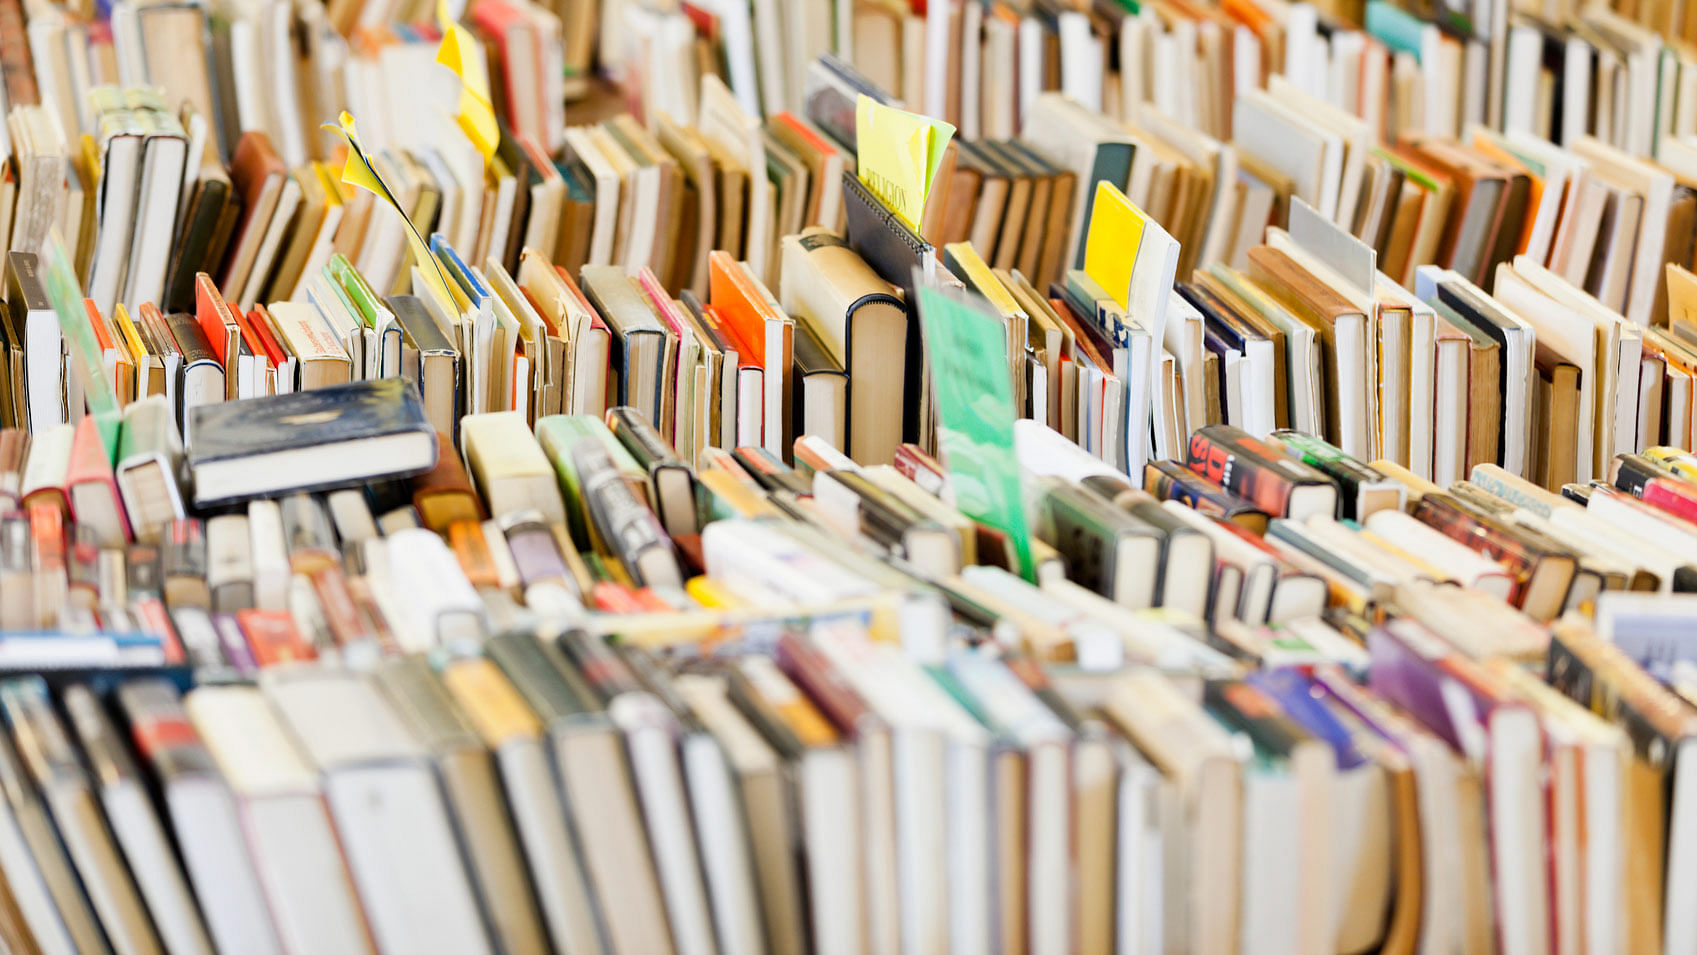 The books were going on sale for as little as Rs 25. (Photo: iStock)